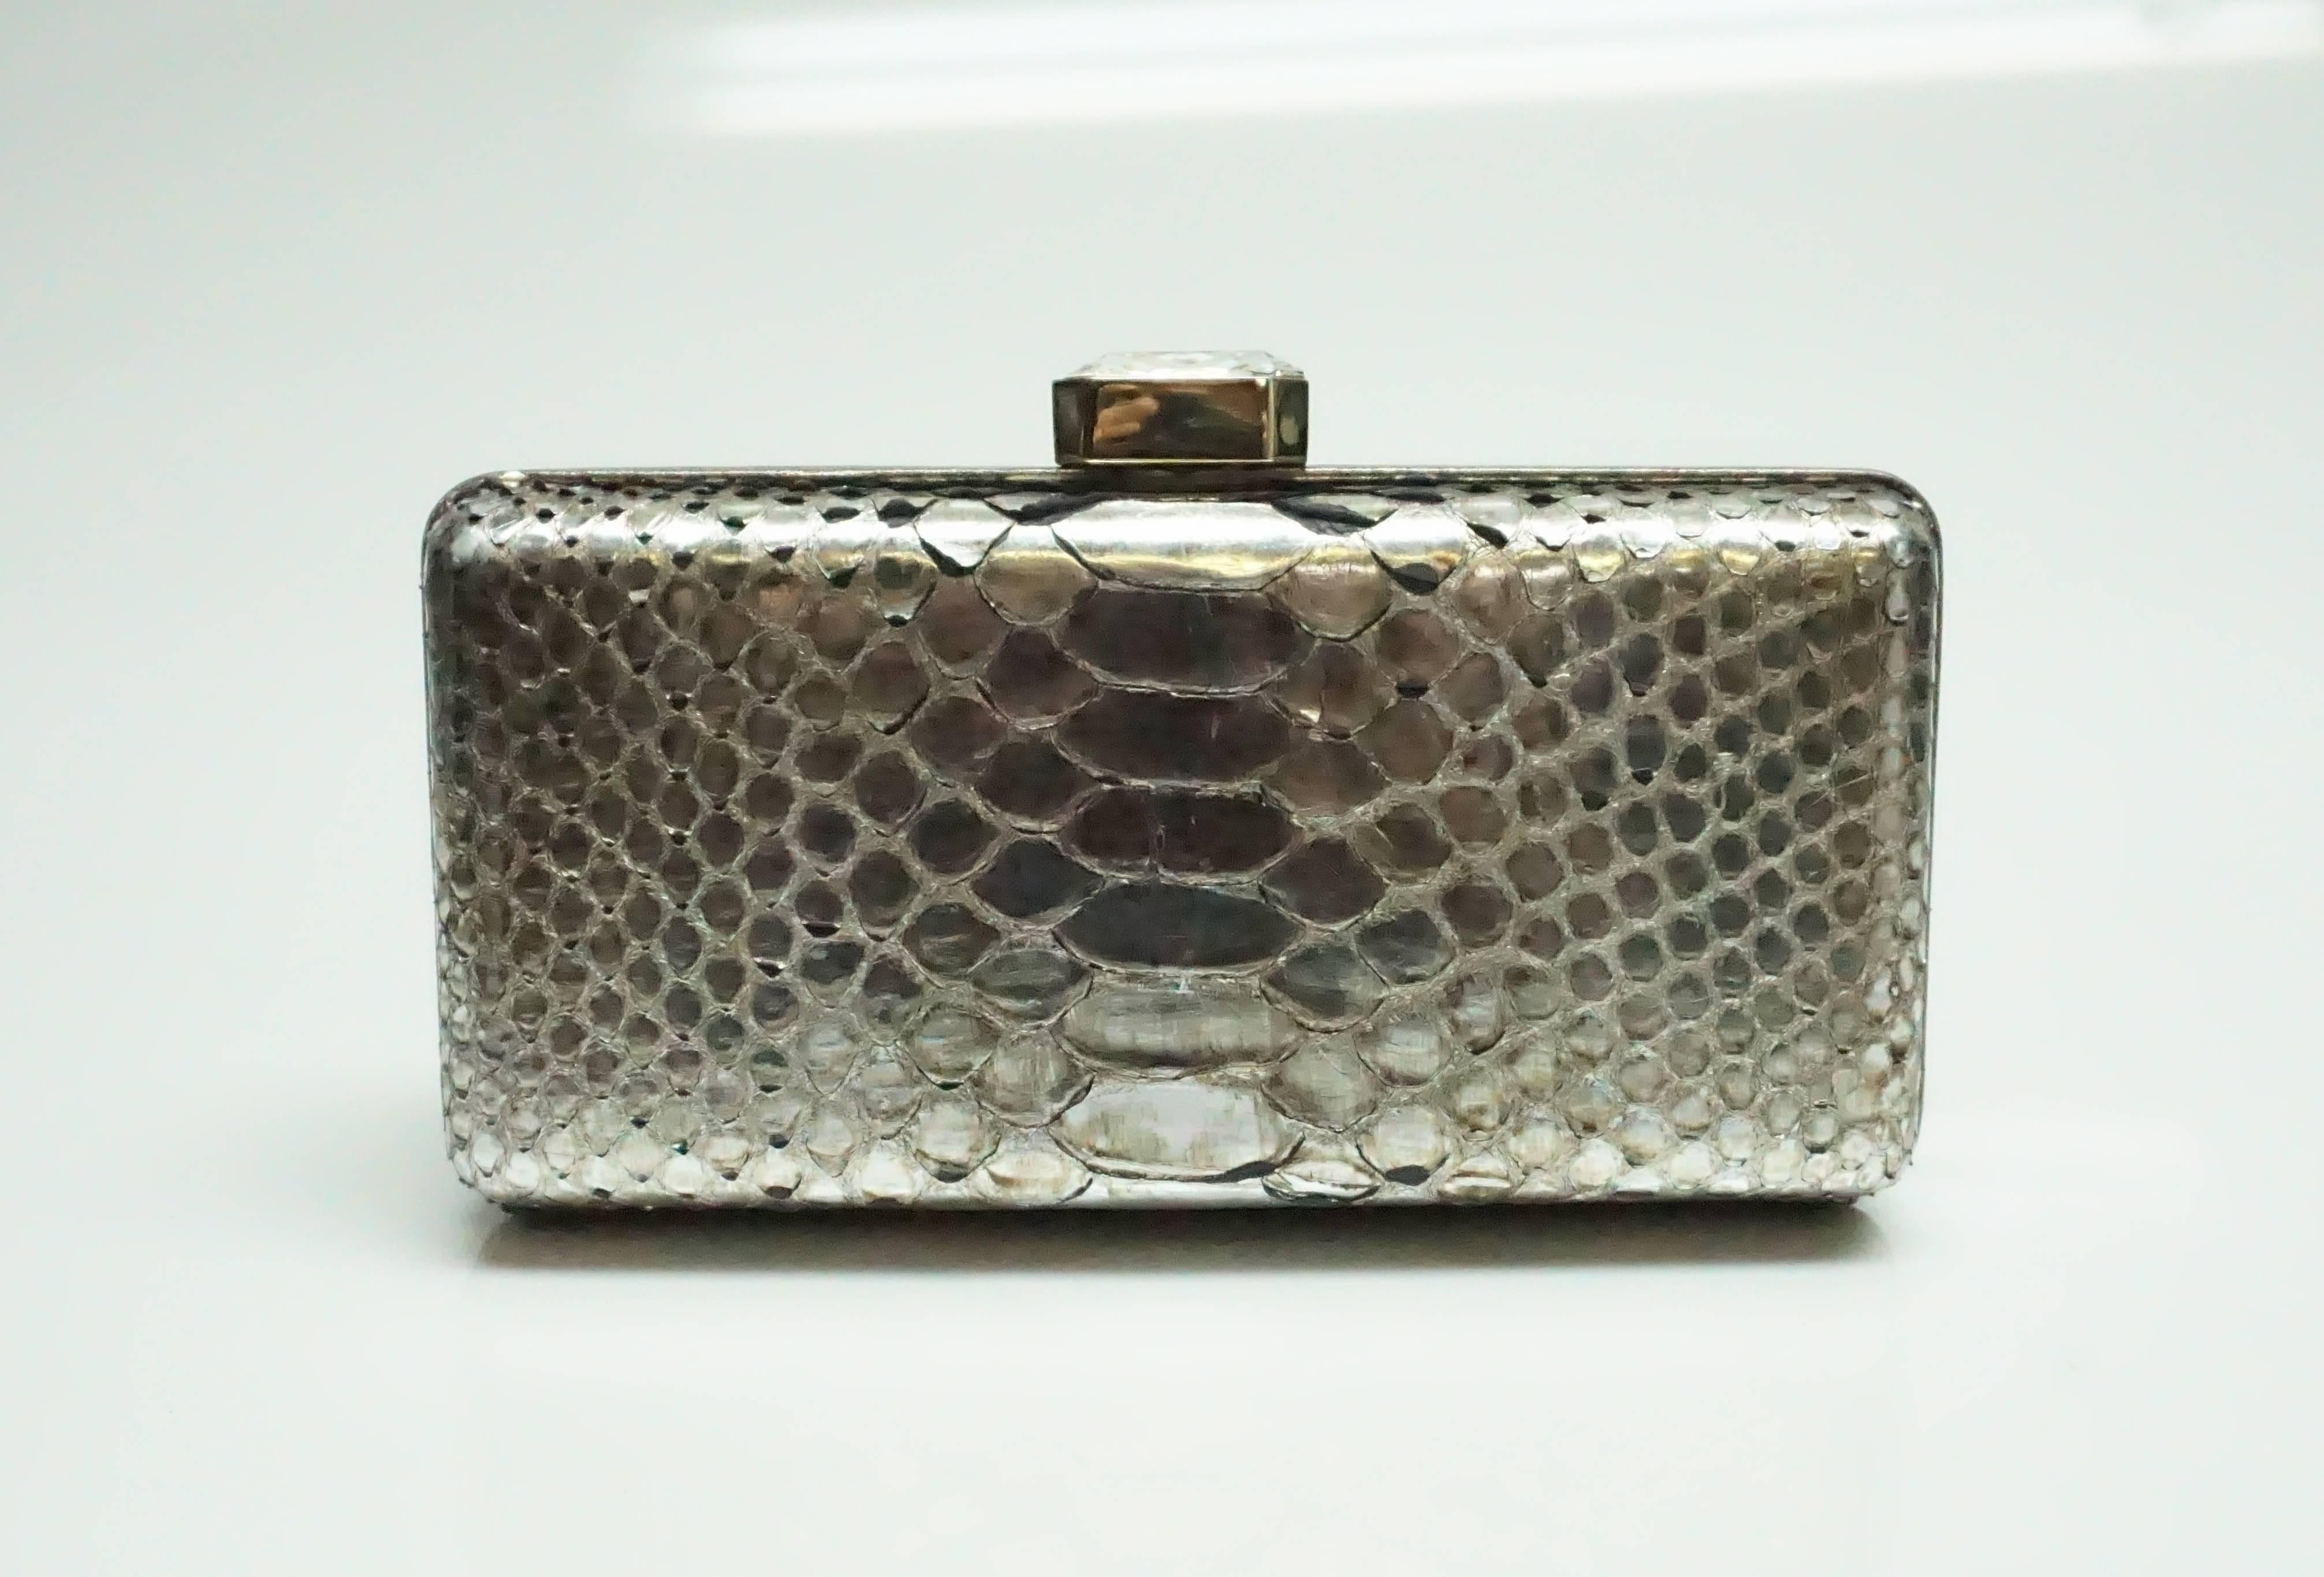 Oscar De La Renta Metallic Python Box Clutch  This beautiful piece is in good condition with some of the python skin a bit lifted. The entire outside of the clutch is made up of python skin and a leather trim. The inside is lined with silk. The